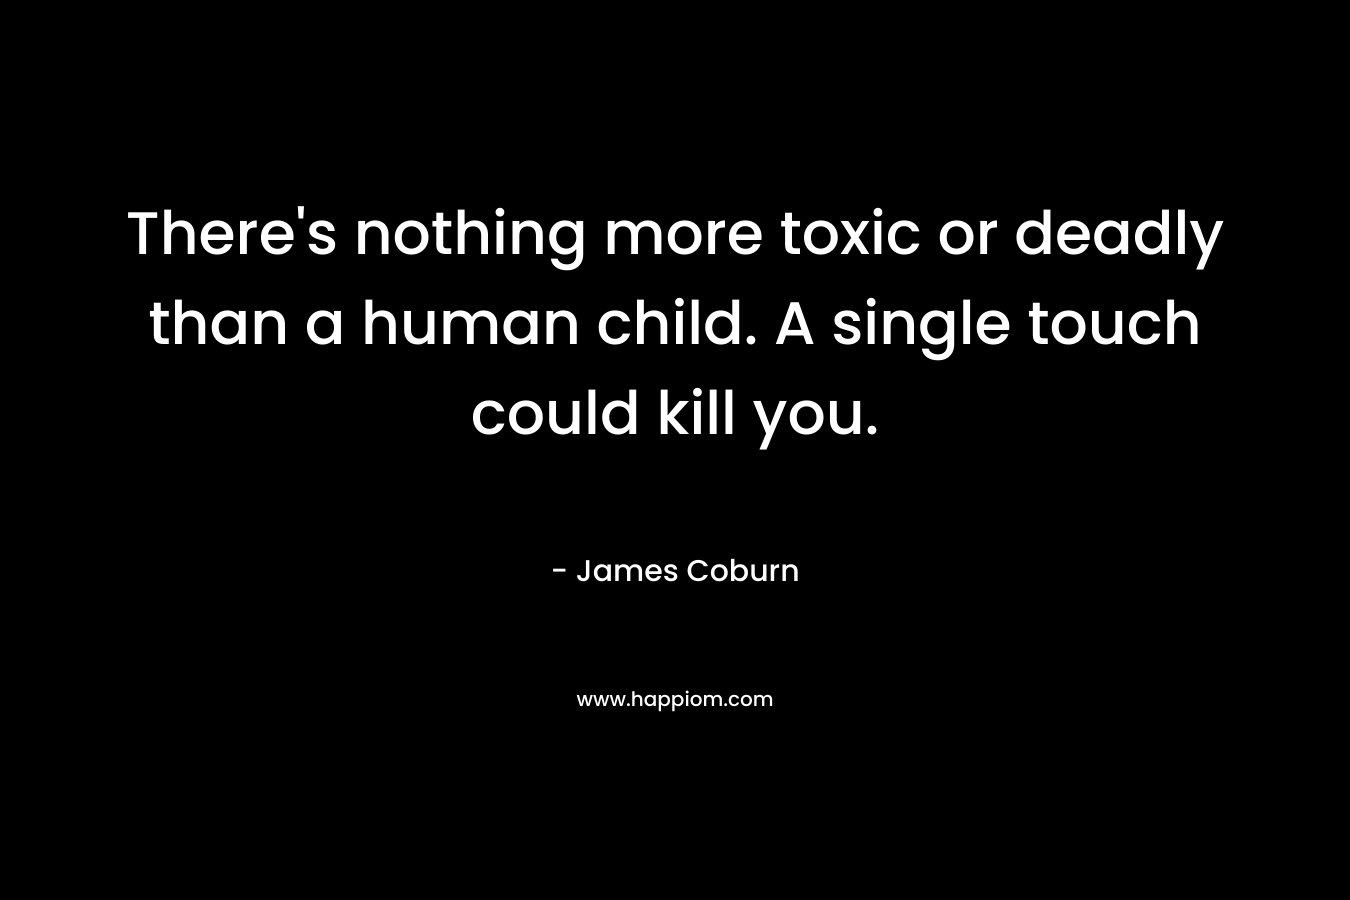 There's nothing more toxic or deadly than a human child. A single touch could kill you.